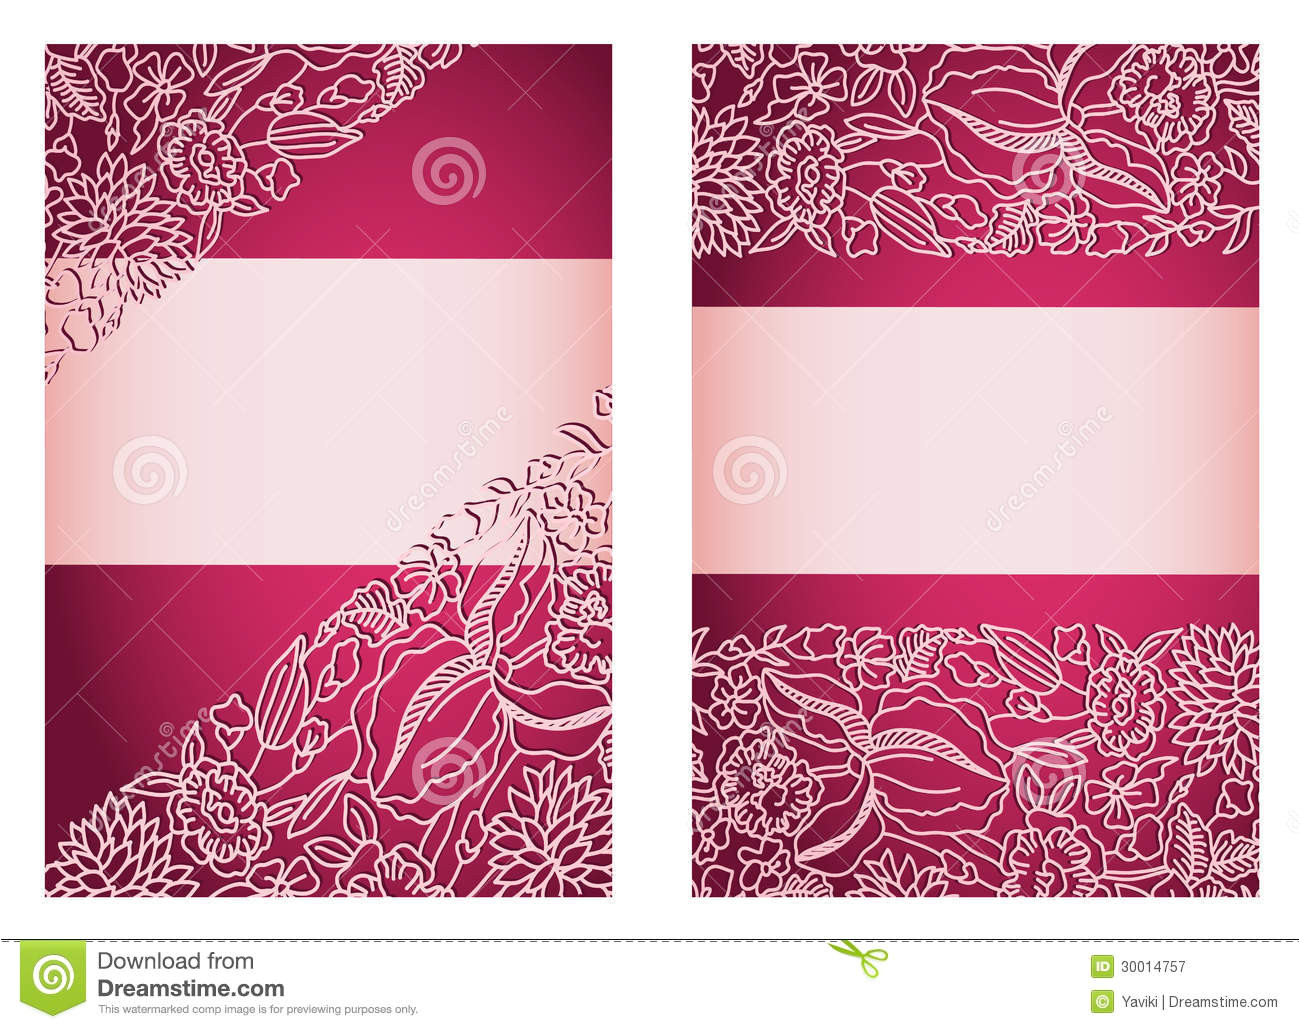 royalty free stock photography invitation card back front sides to wedding announcements x image30014757